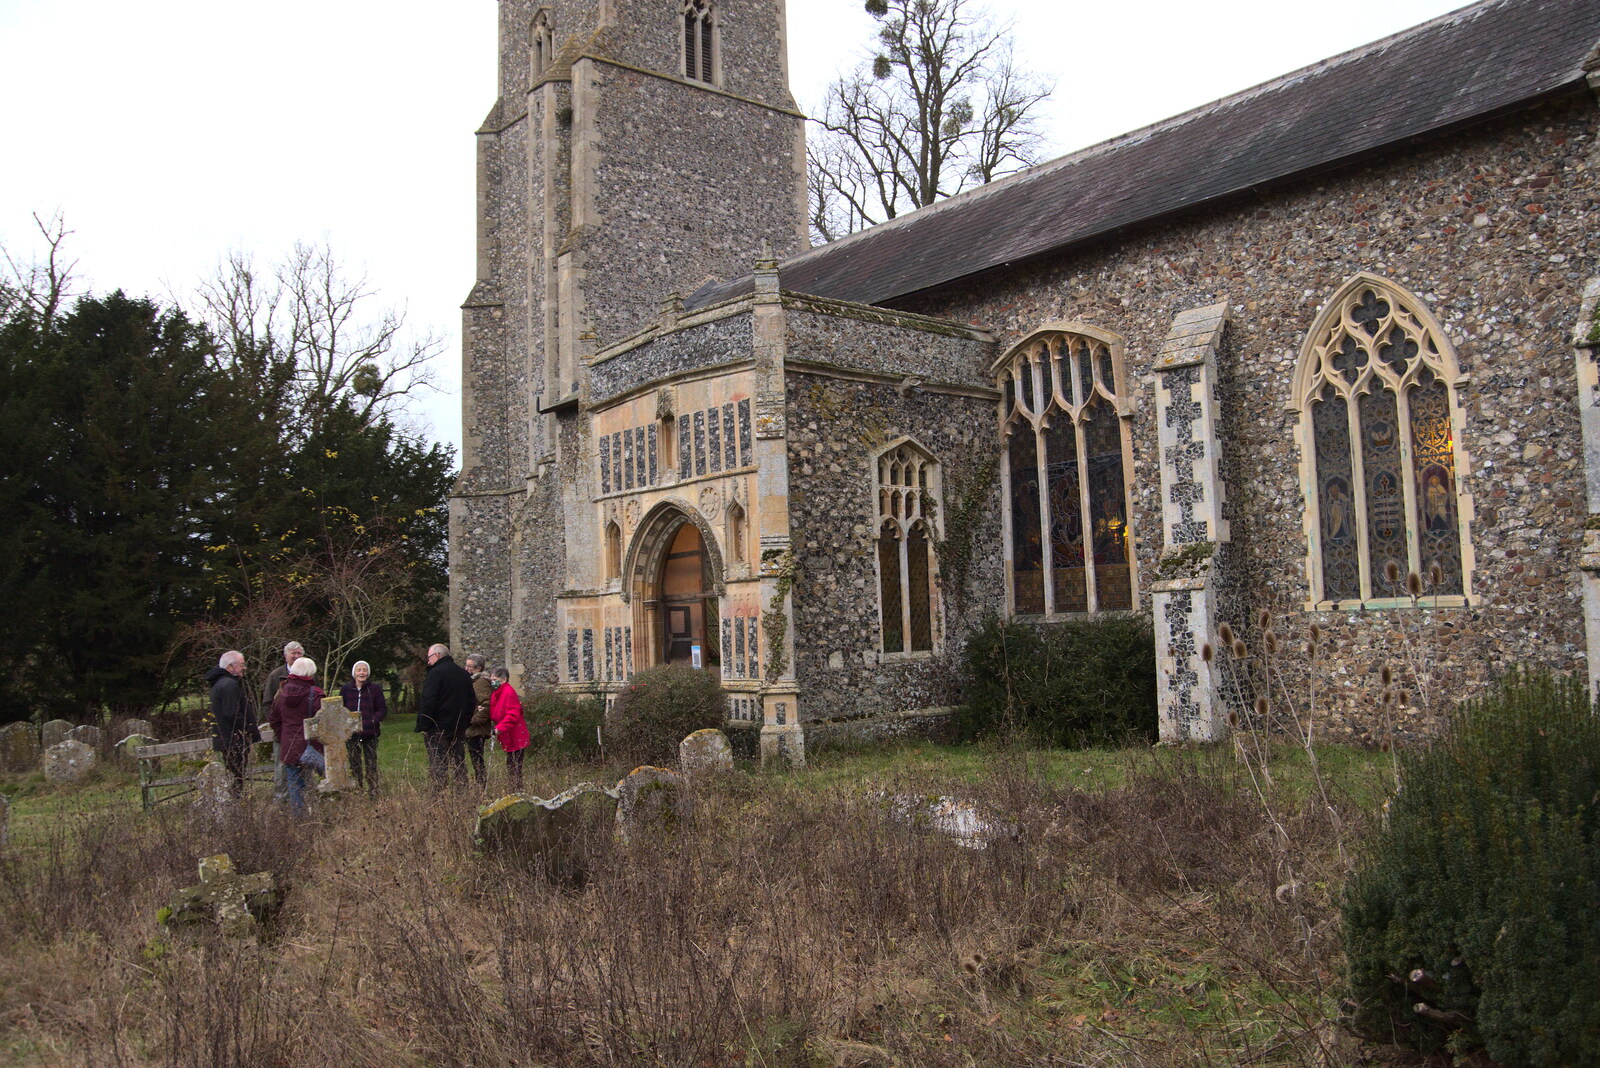 A small group hangs around outside the church from GSB Carols and Beer With the Lads, Thornham and Thorndon, Suffolk  - 18th December 2021